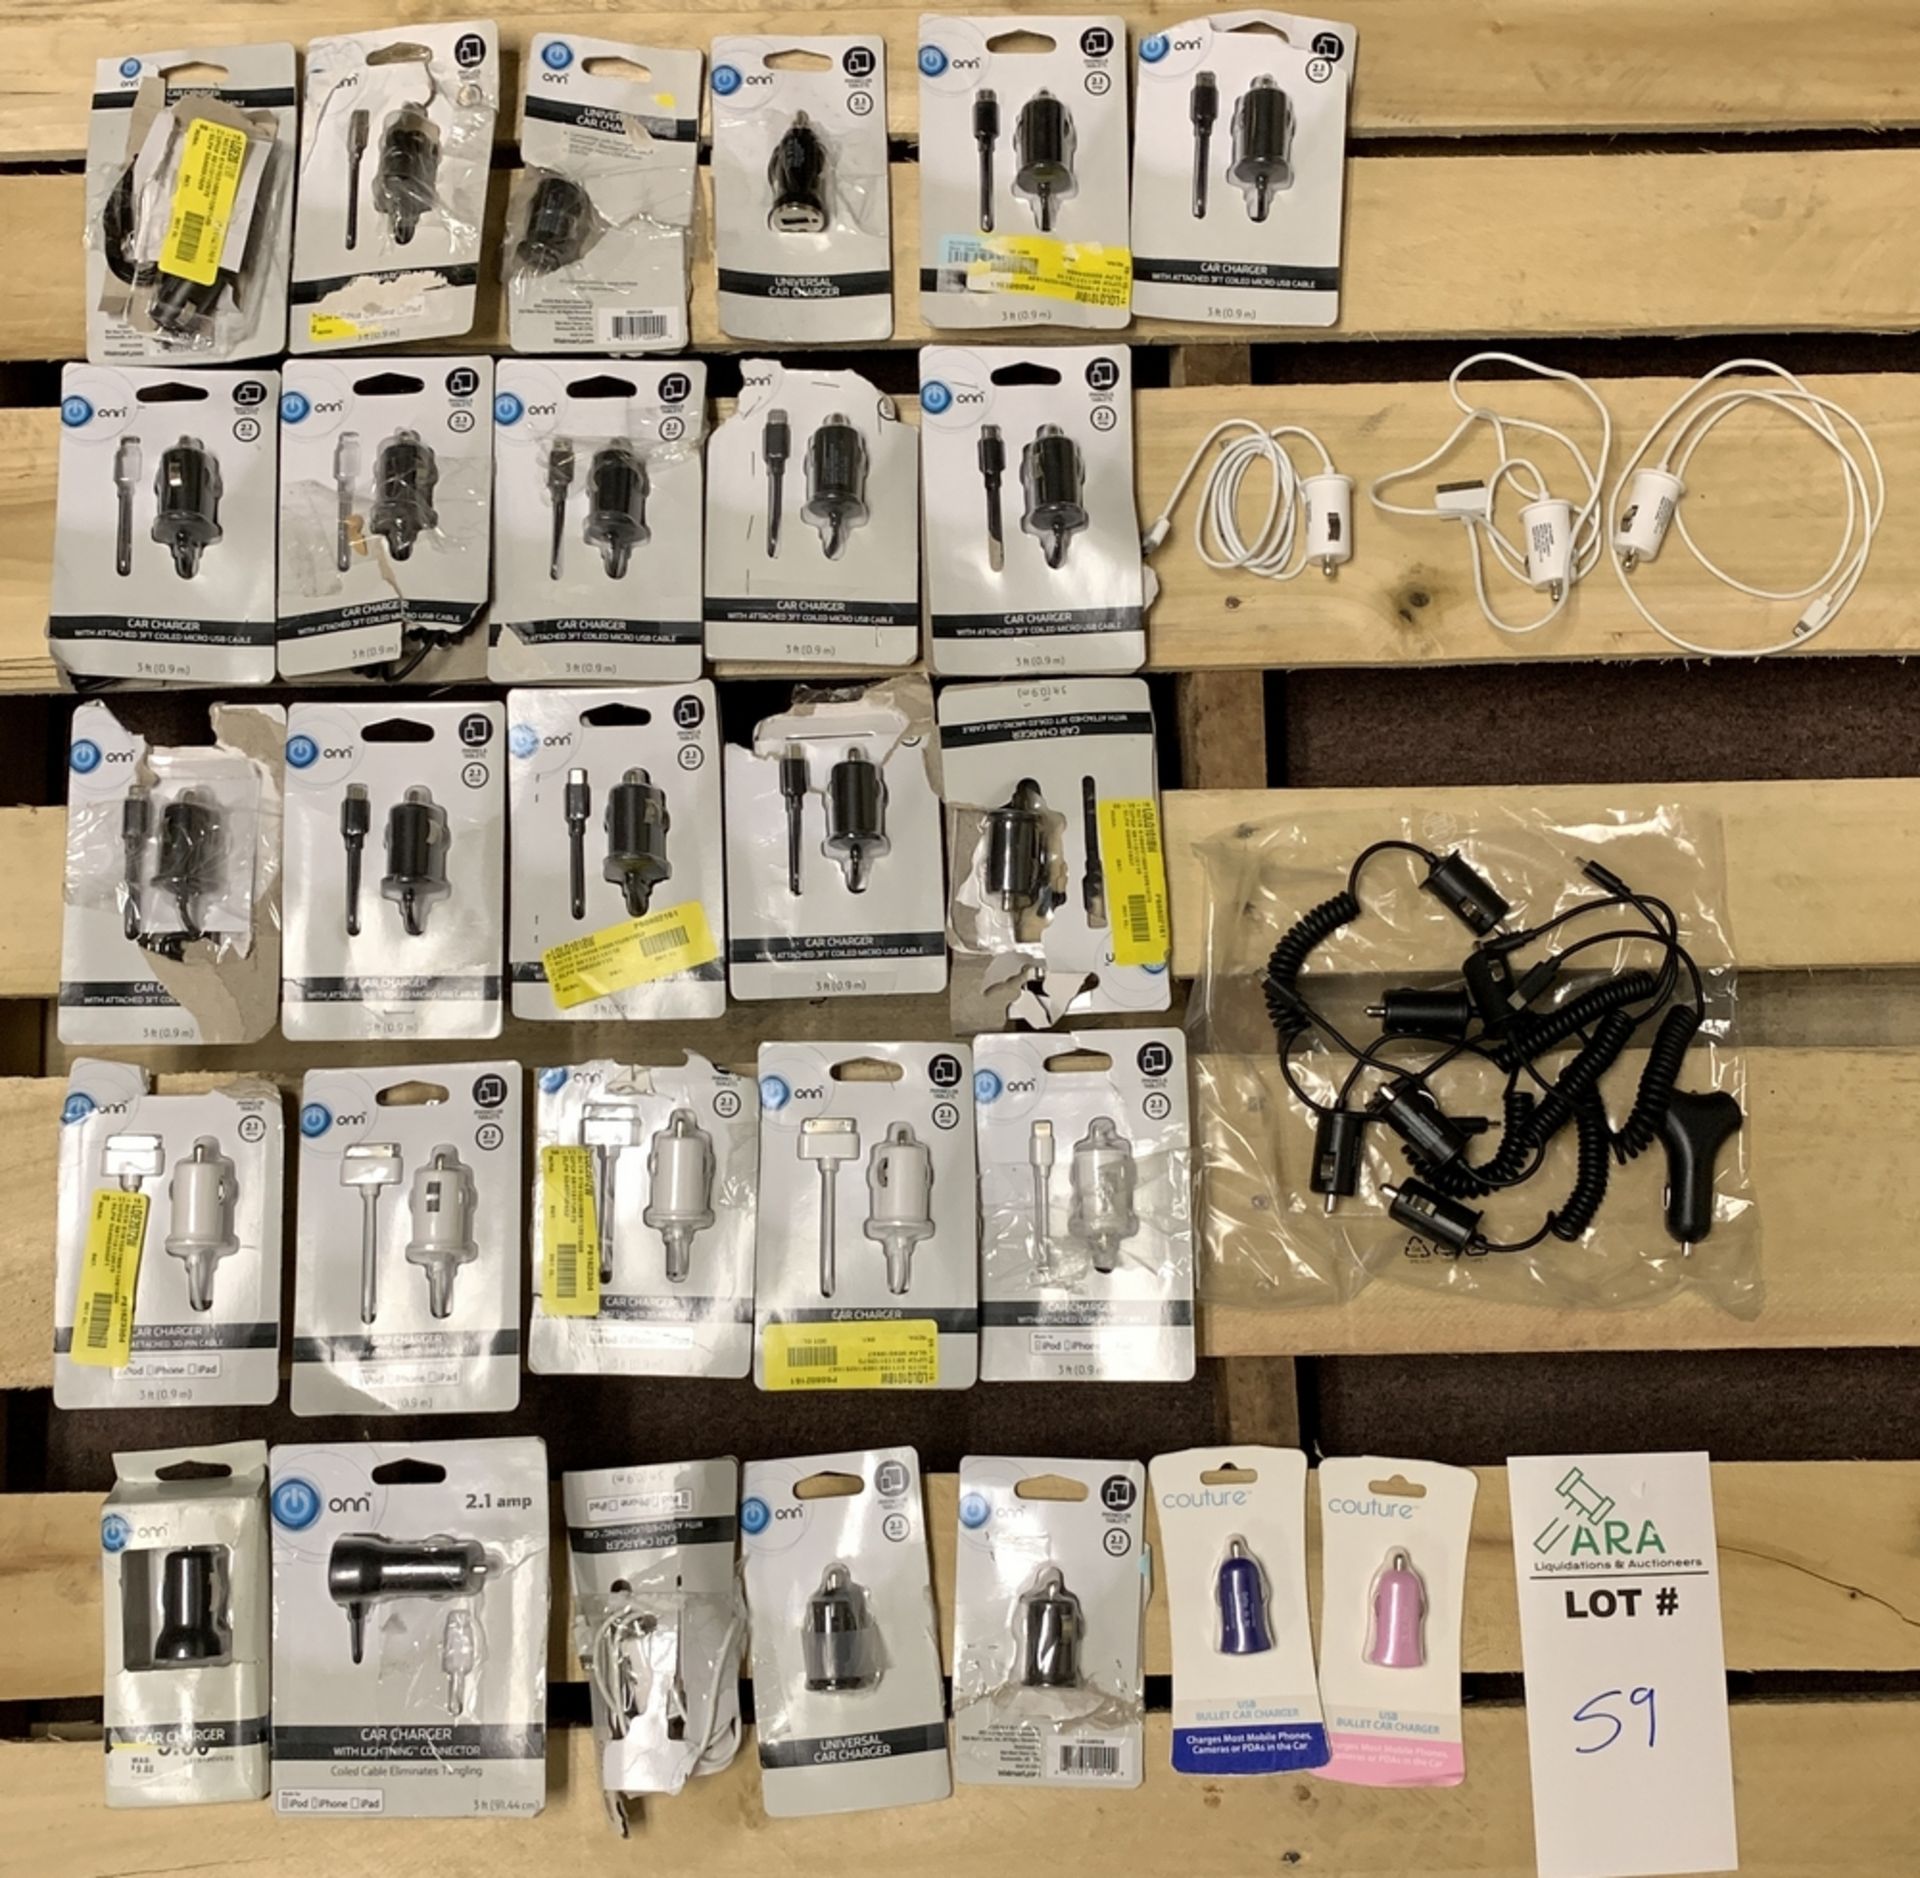 BOX OF CAR CHARGERS - VARIOUS TYPES - CONNECTIONS INCLUDING IPHONE, IPAD, IPOD, MICRO USB ALL